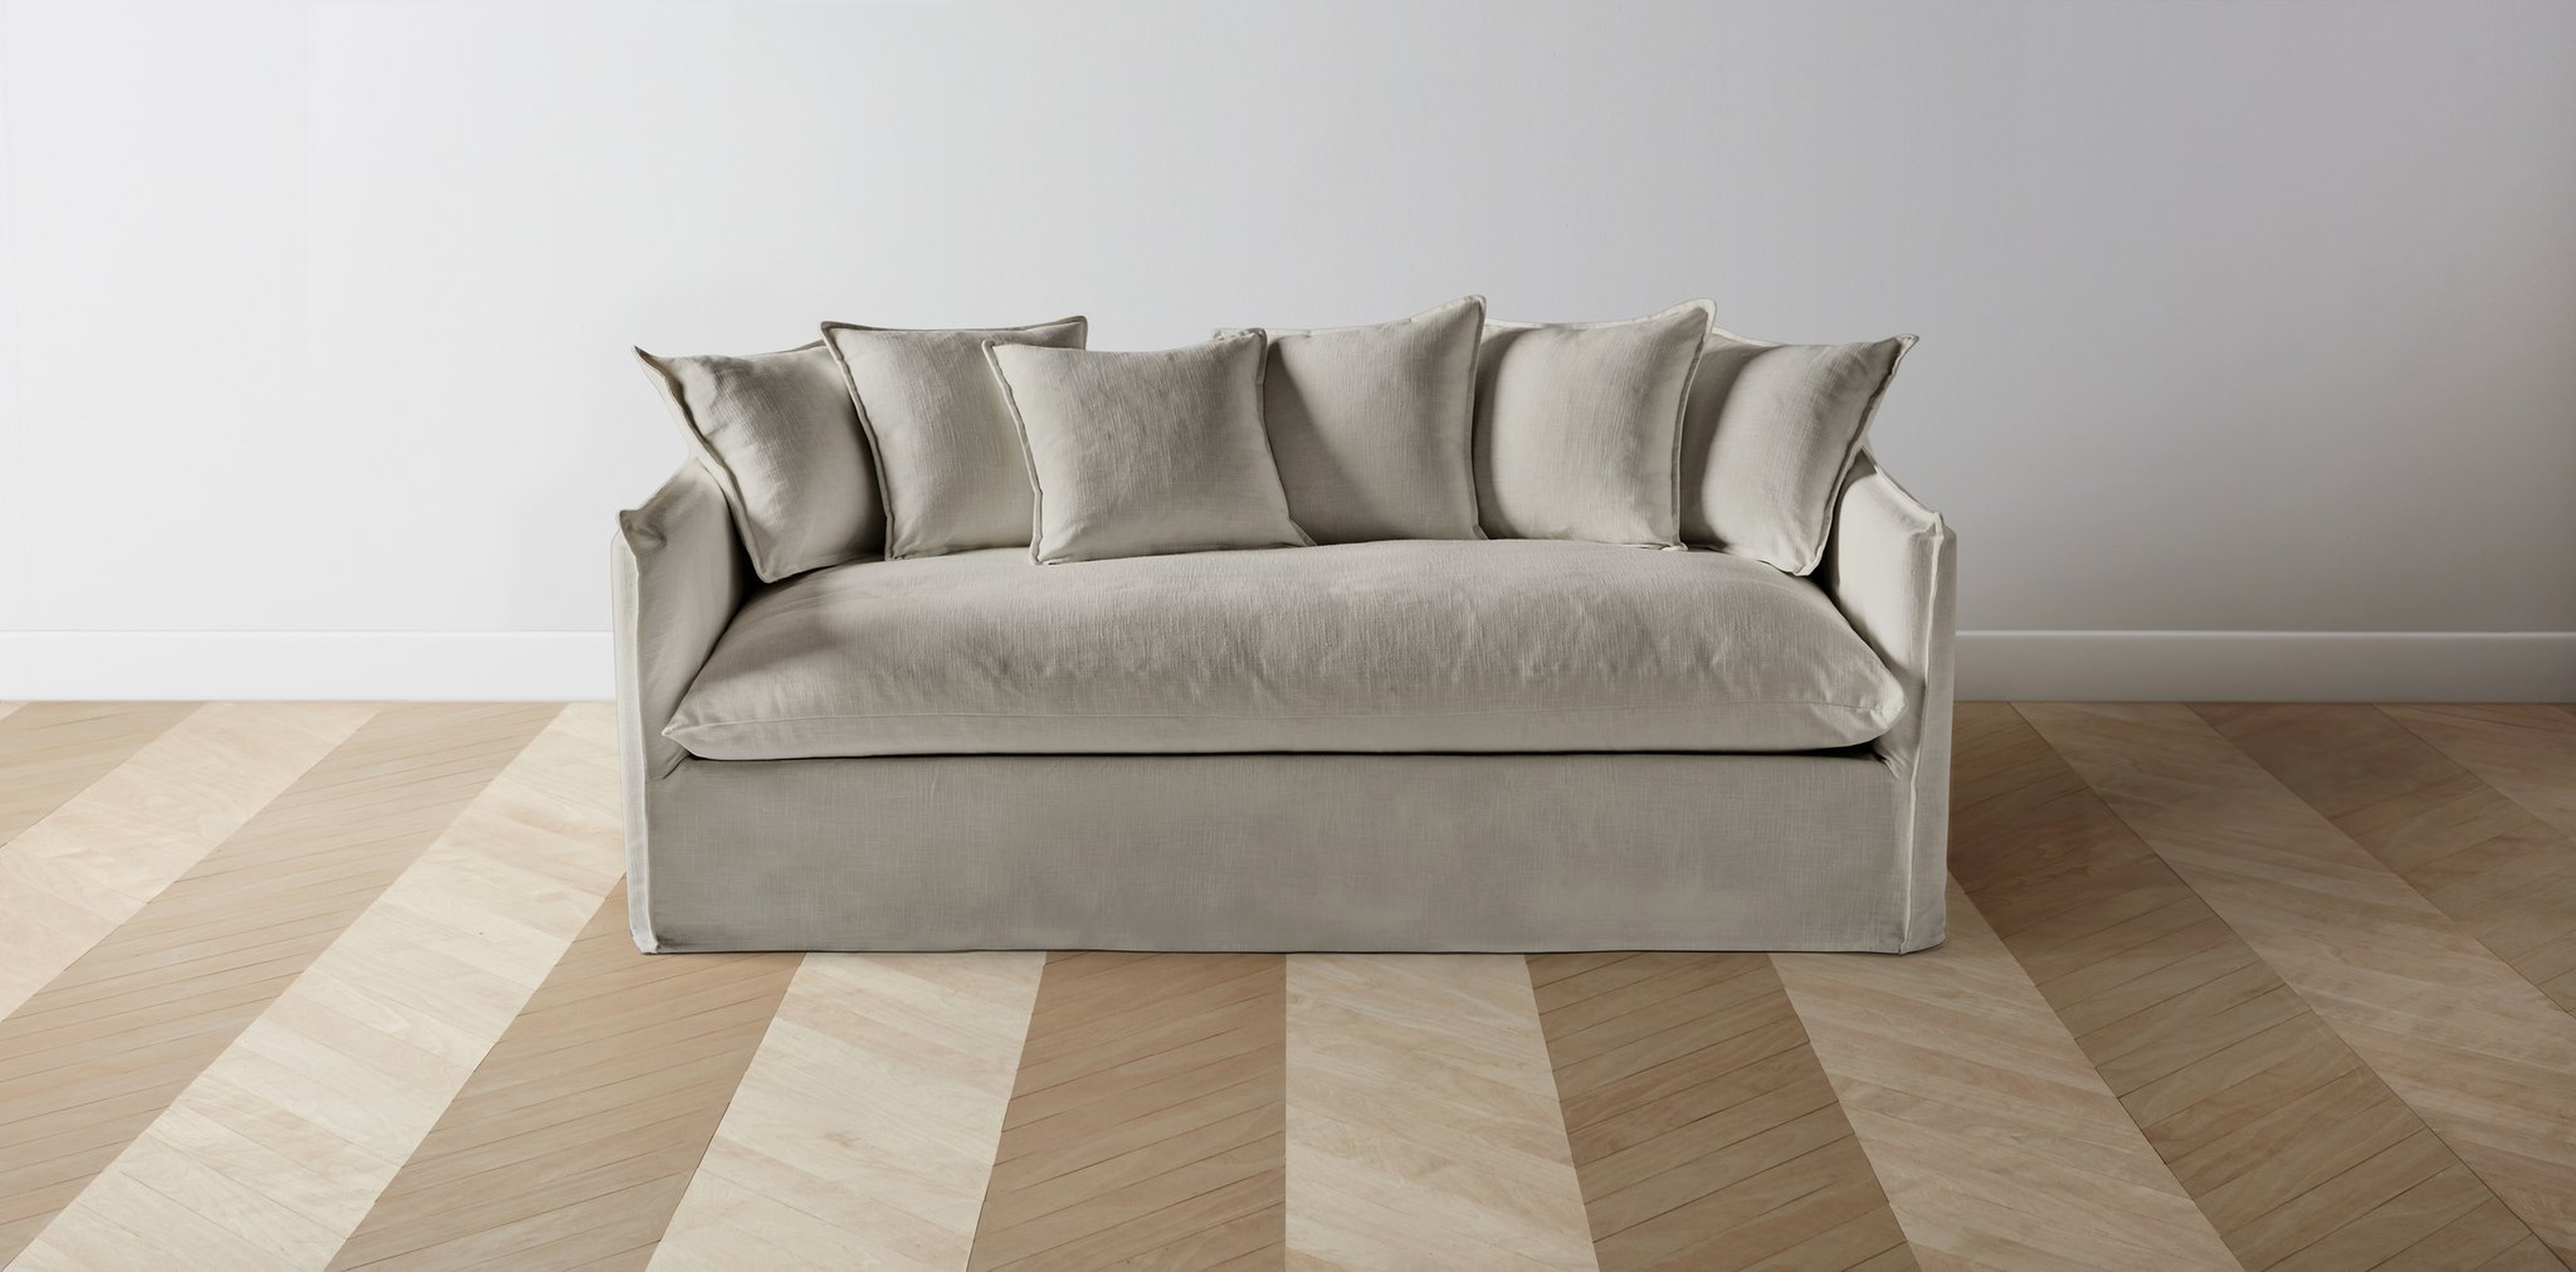 The Dune - Sofa 95" Wide - Maiden Home